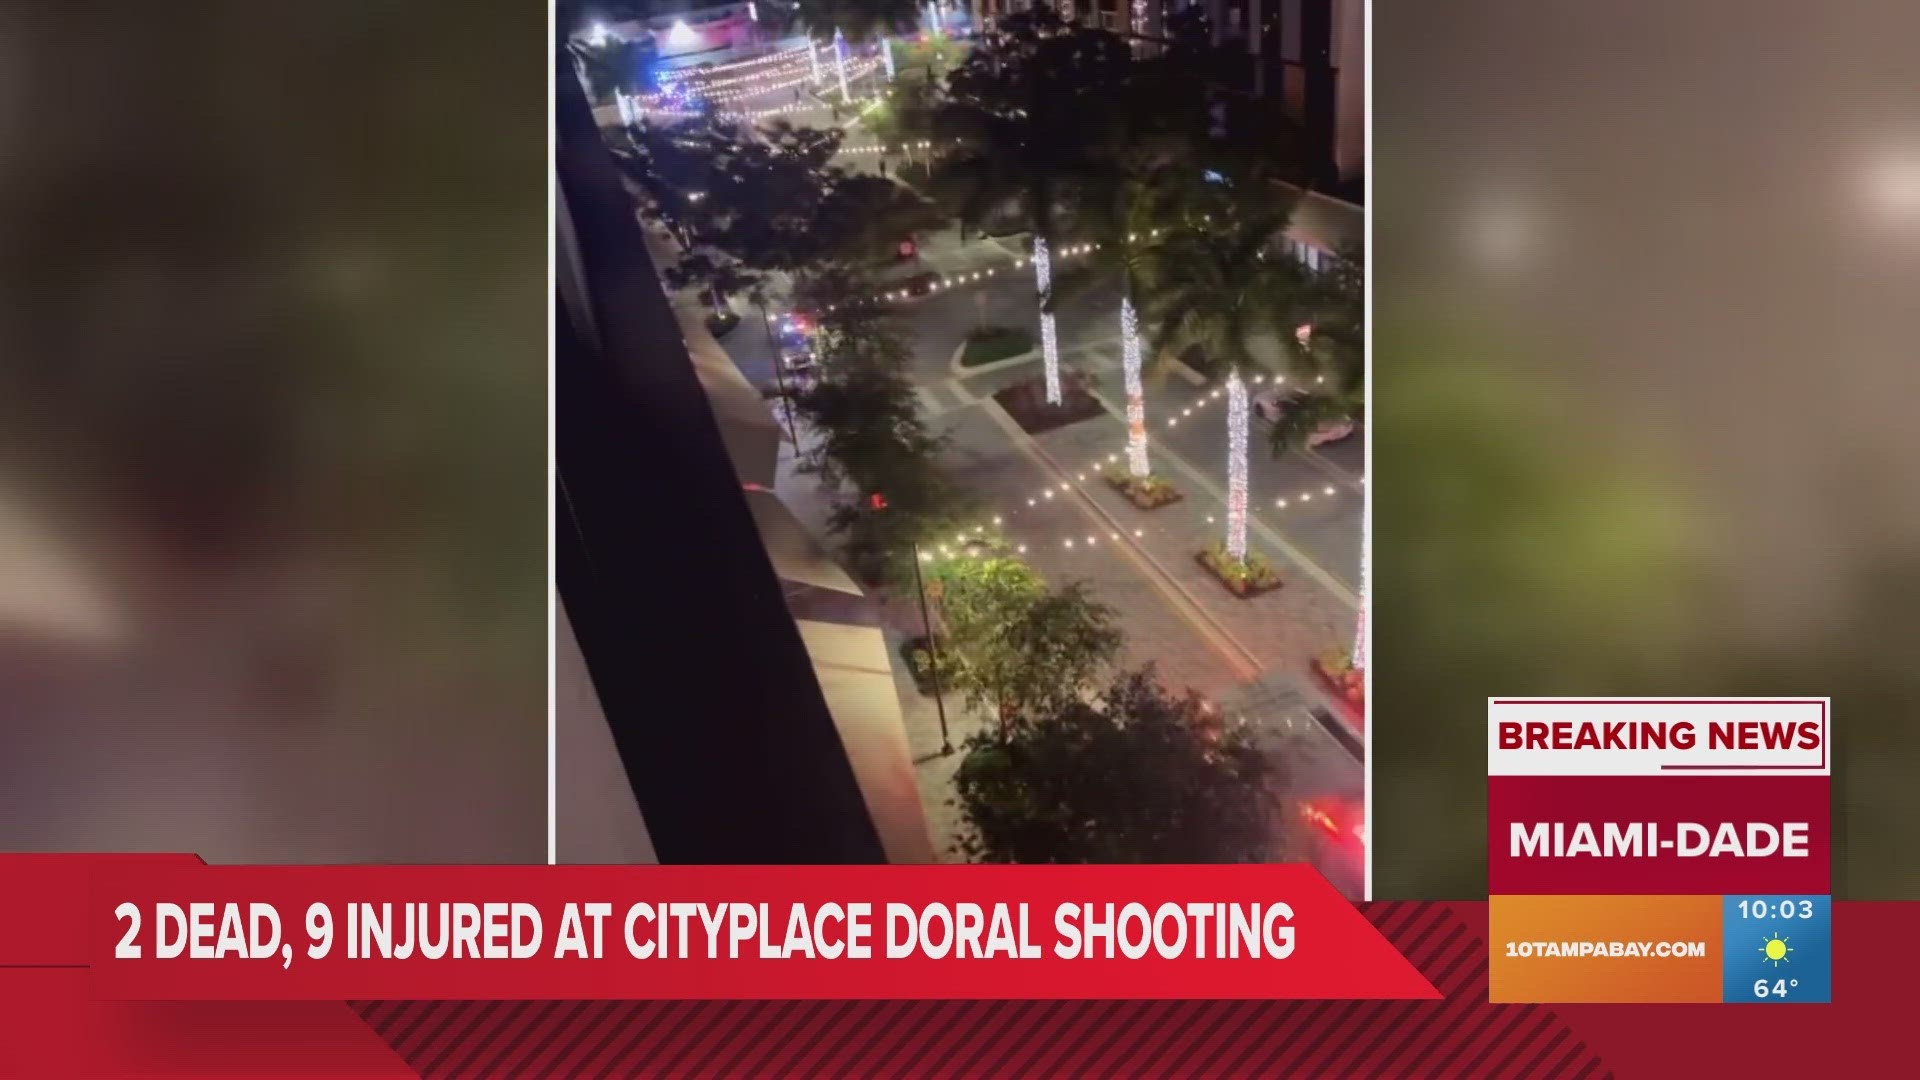 Two people are dead and several others are injured after a shooting in a Doral mall.